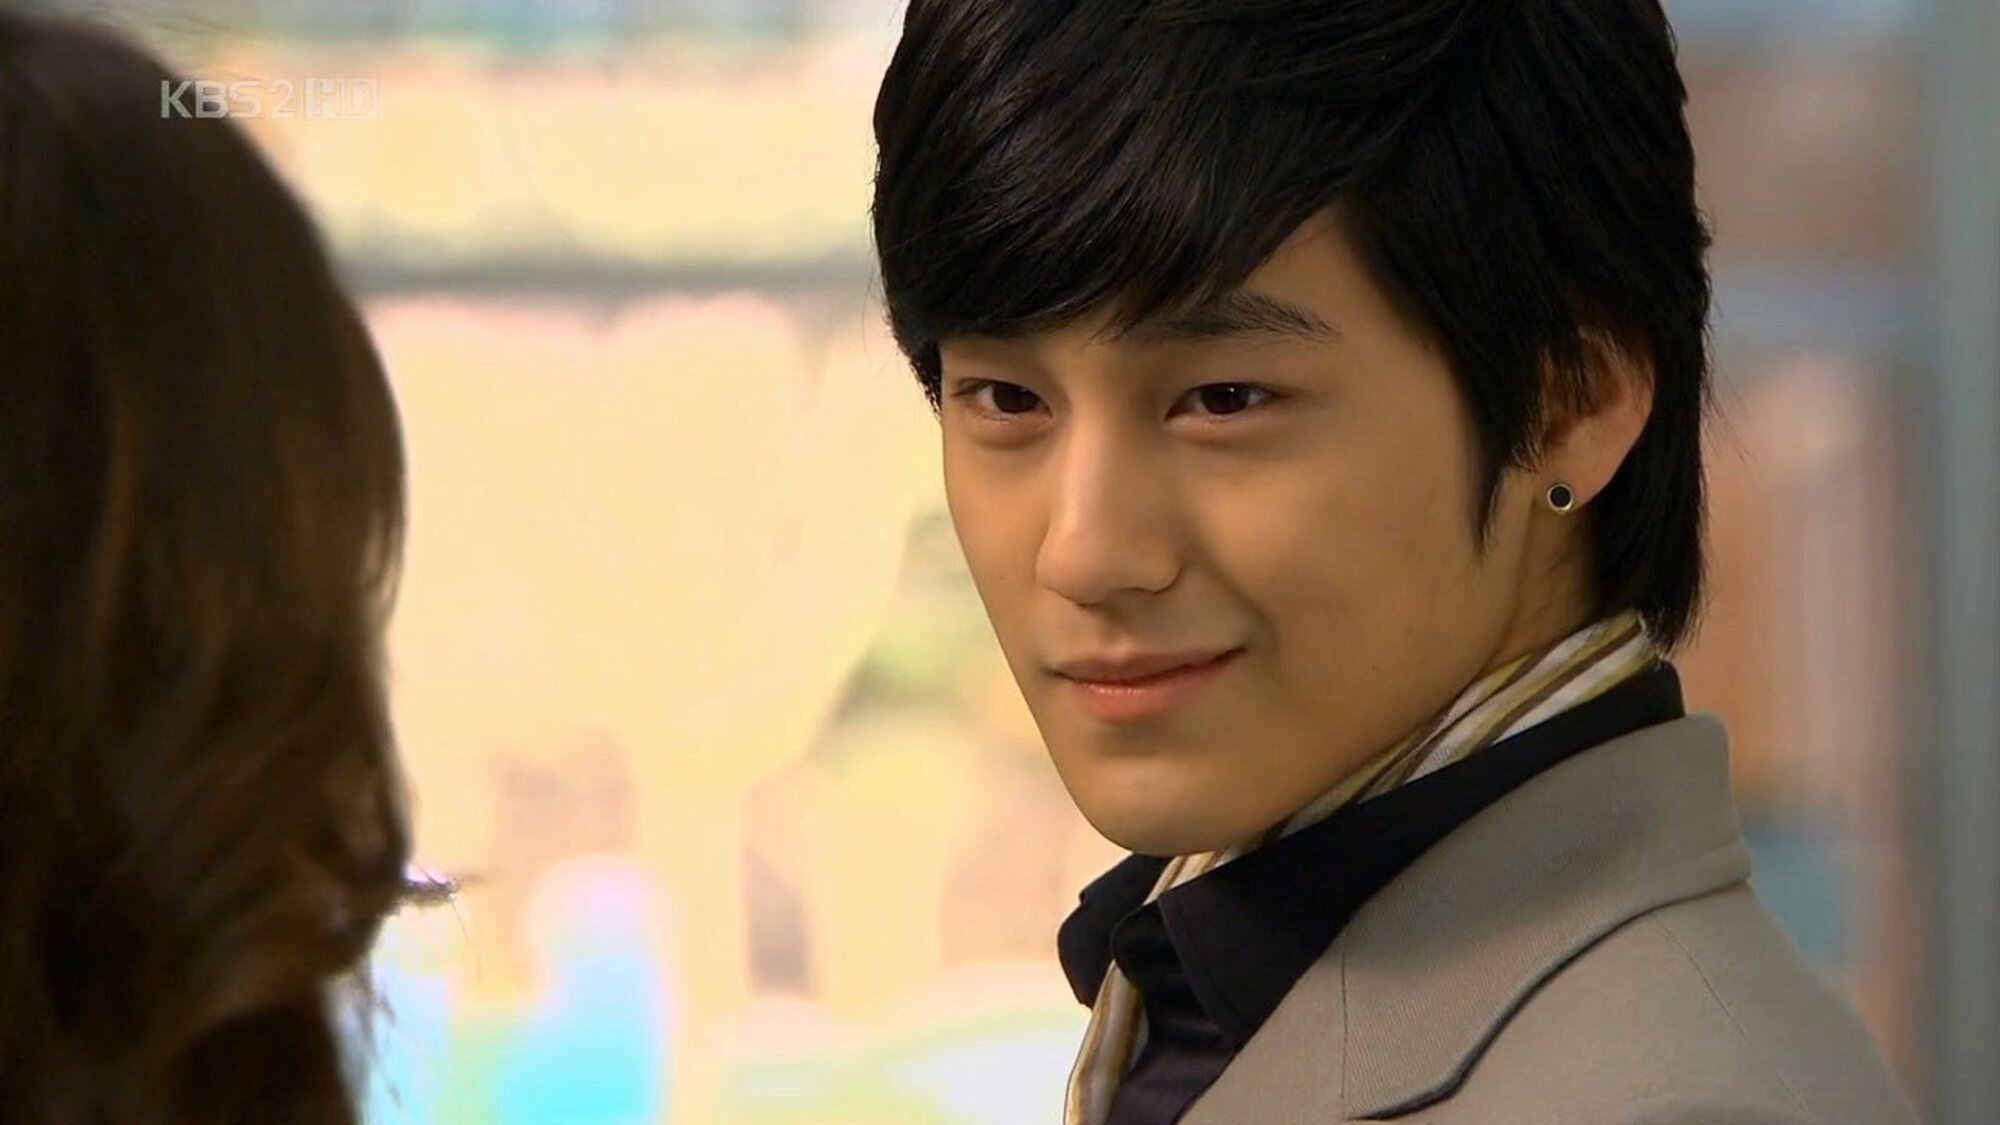 Kim Bum's Blonde Hair in "Boys Over Flowers" - wide 1